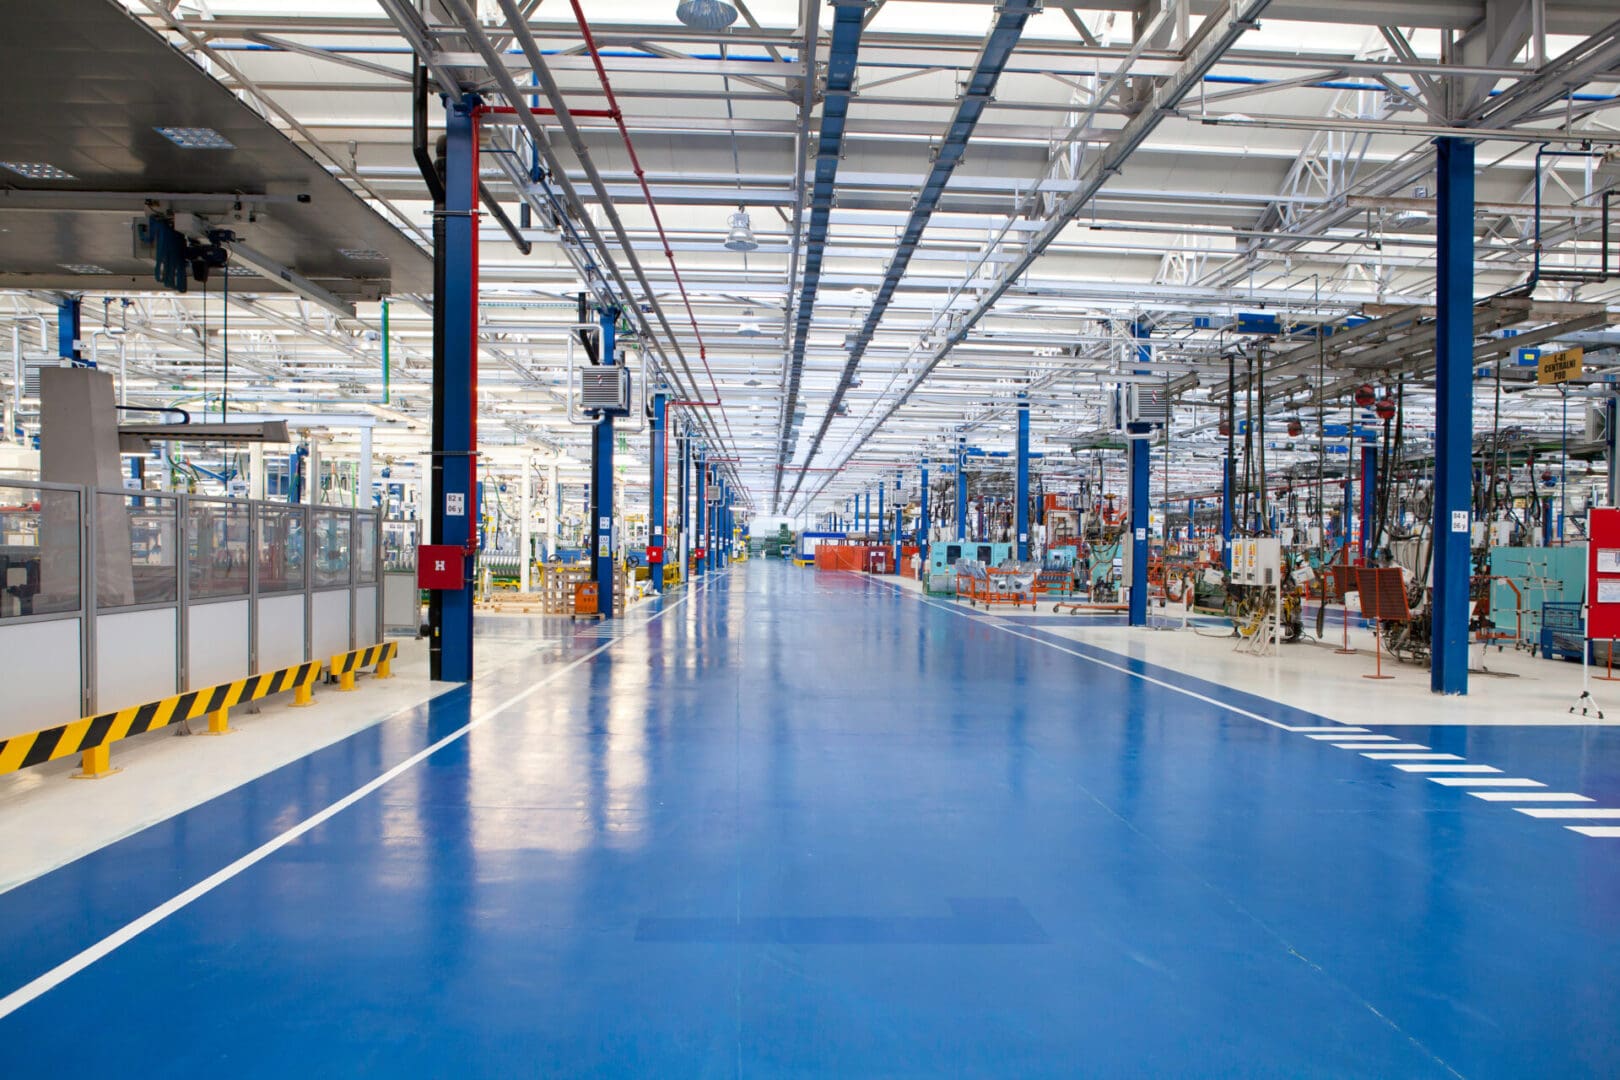 A factory floor with many blue floors and white walls.